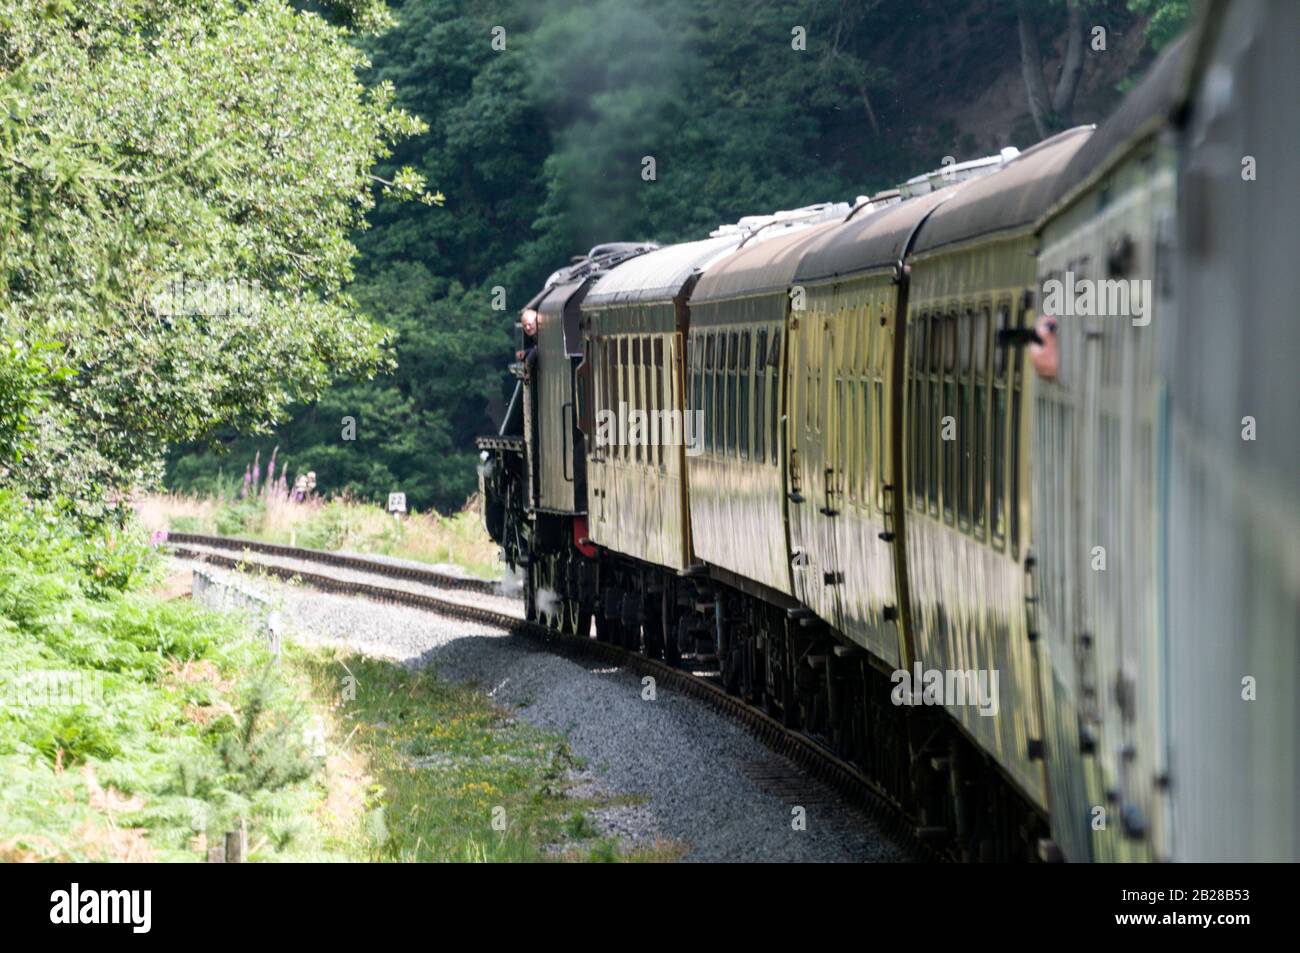 A passenger steam train of the North Yorkshire Moors railway heading for Pickering railway station on the North York Moors, in Britain.  The steam loc Stock Photo